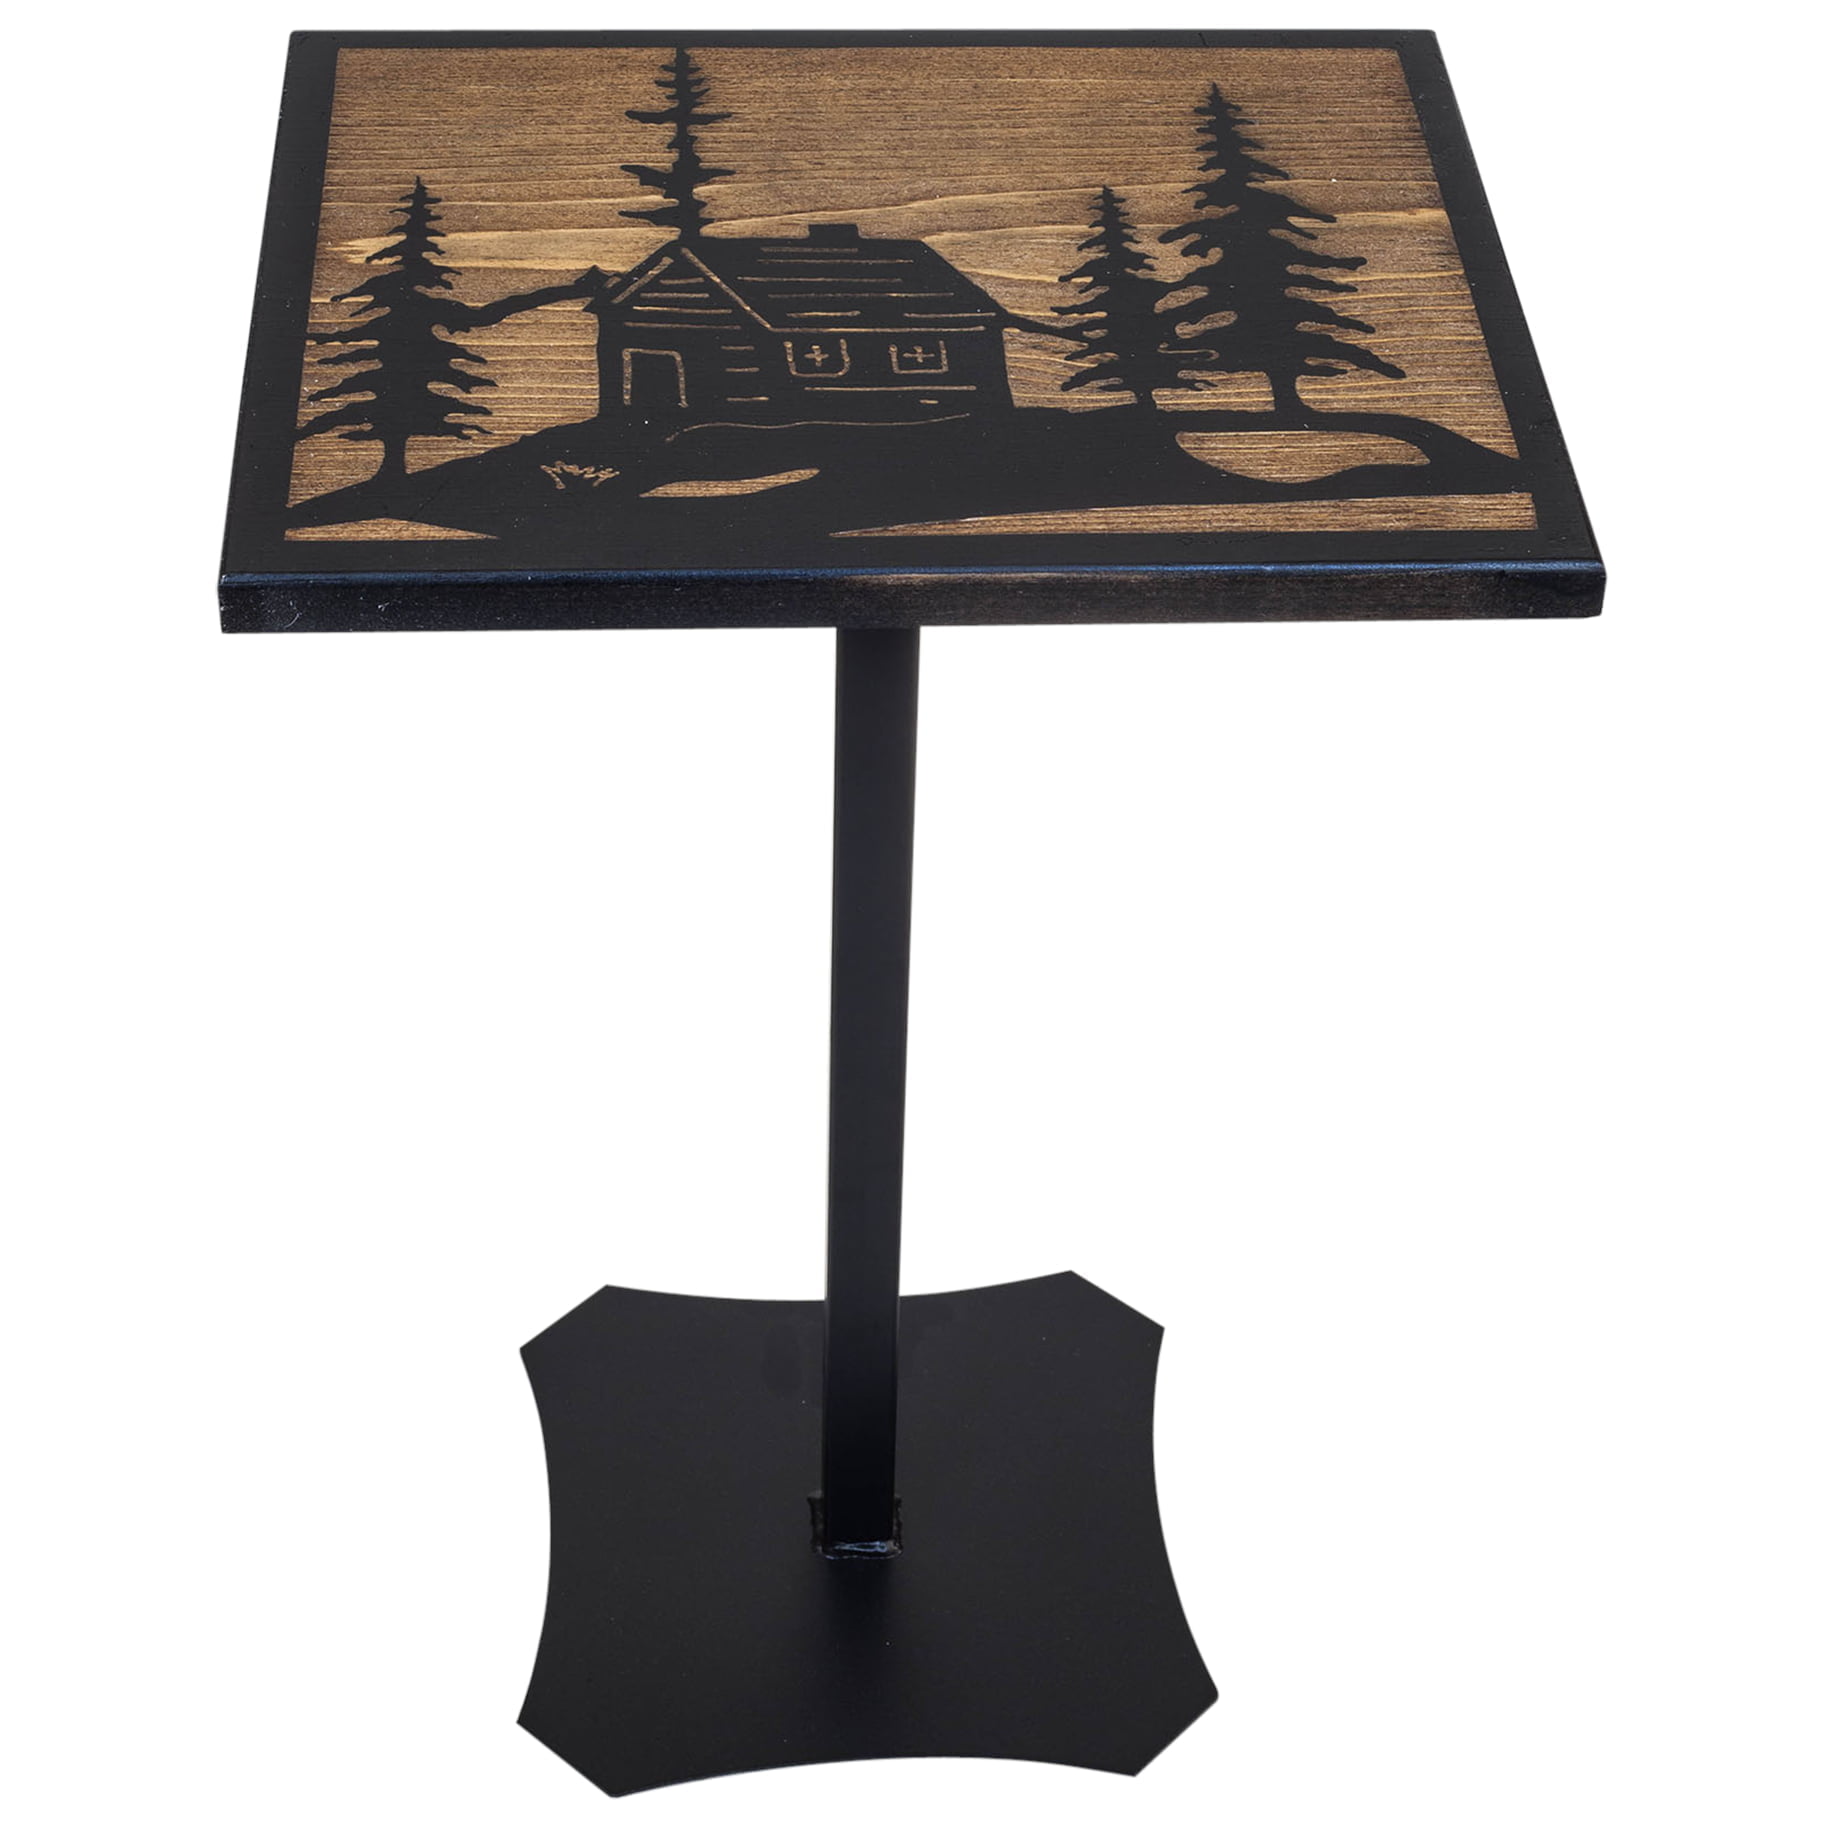 Rustic Square Drink Table